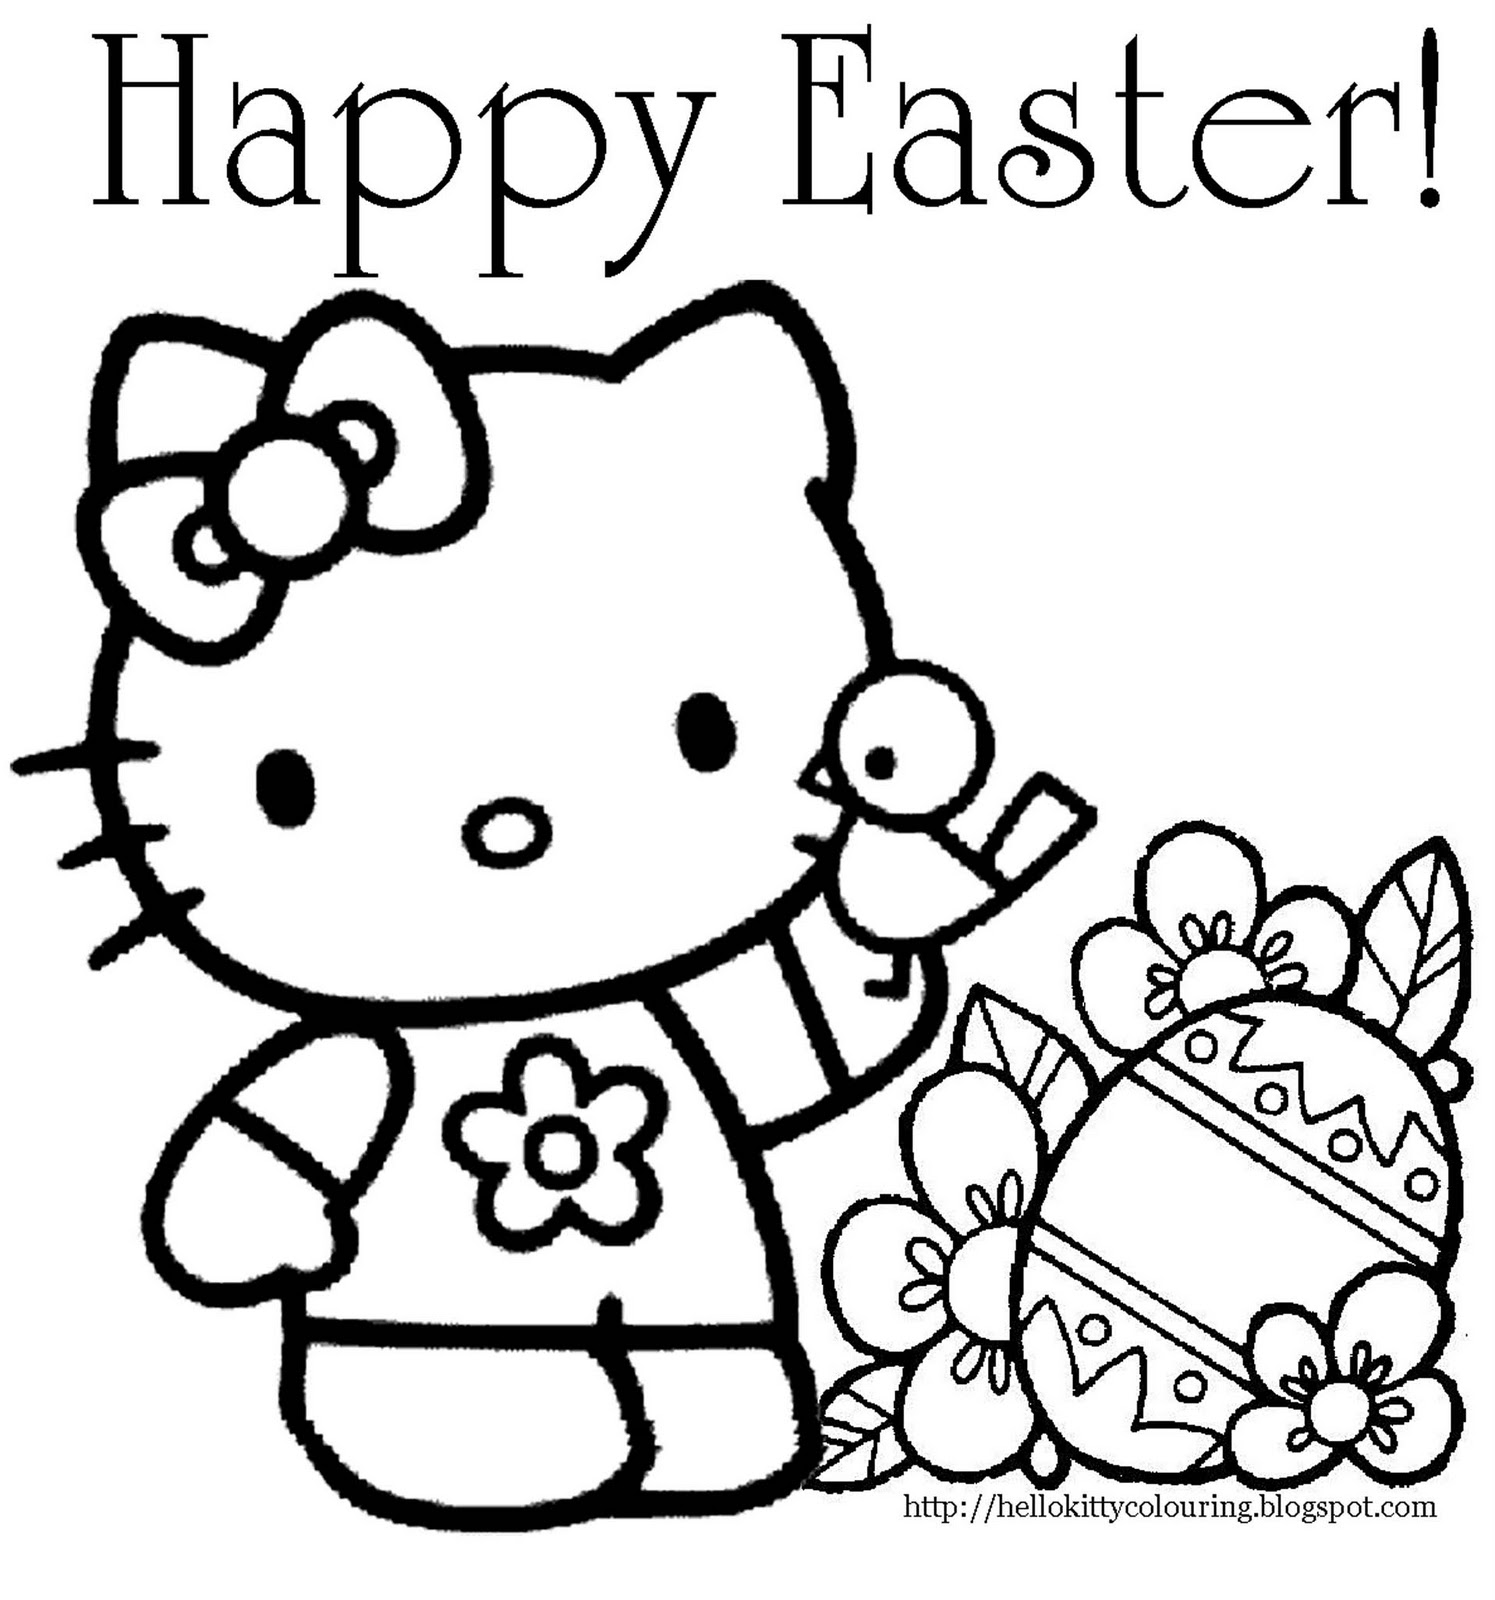 Easter Colouring Coloring Wallpapers Download Free Images Wallpaper [coloring654.blogspot.com]